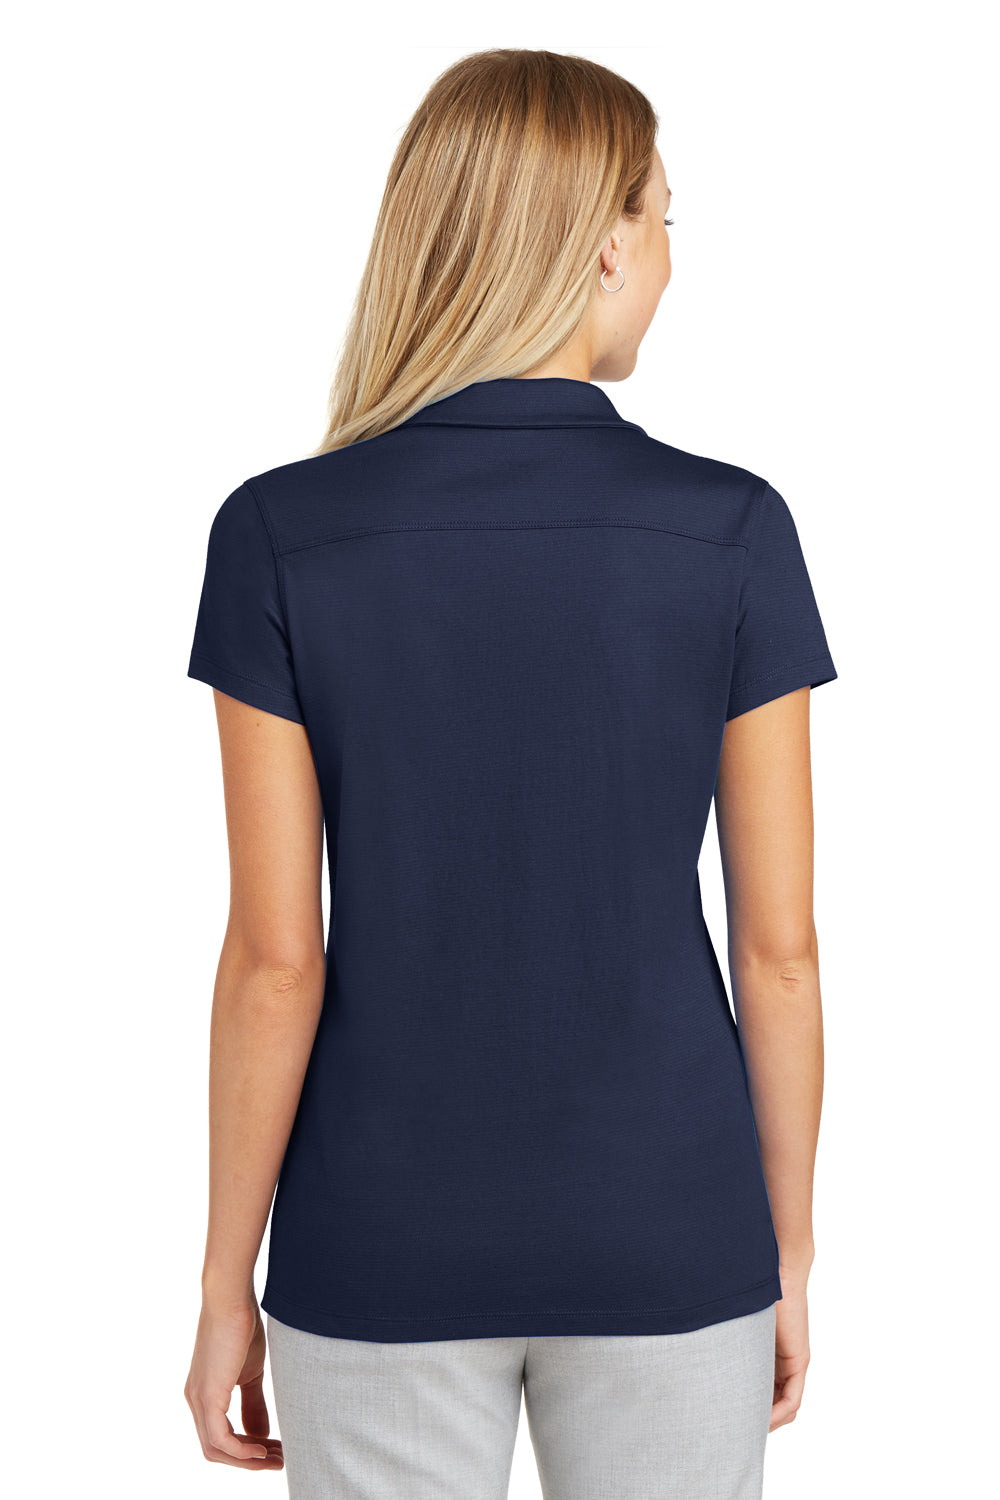 Port Authority L573 Womens Rapid Dry Moisture Wicking Short Sleeve Polo Shirt Navy Blue Back